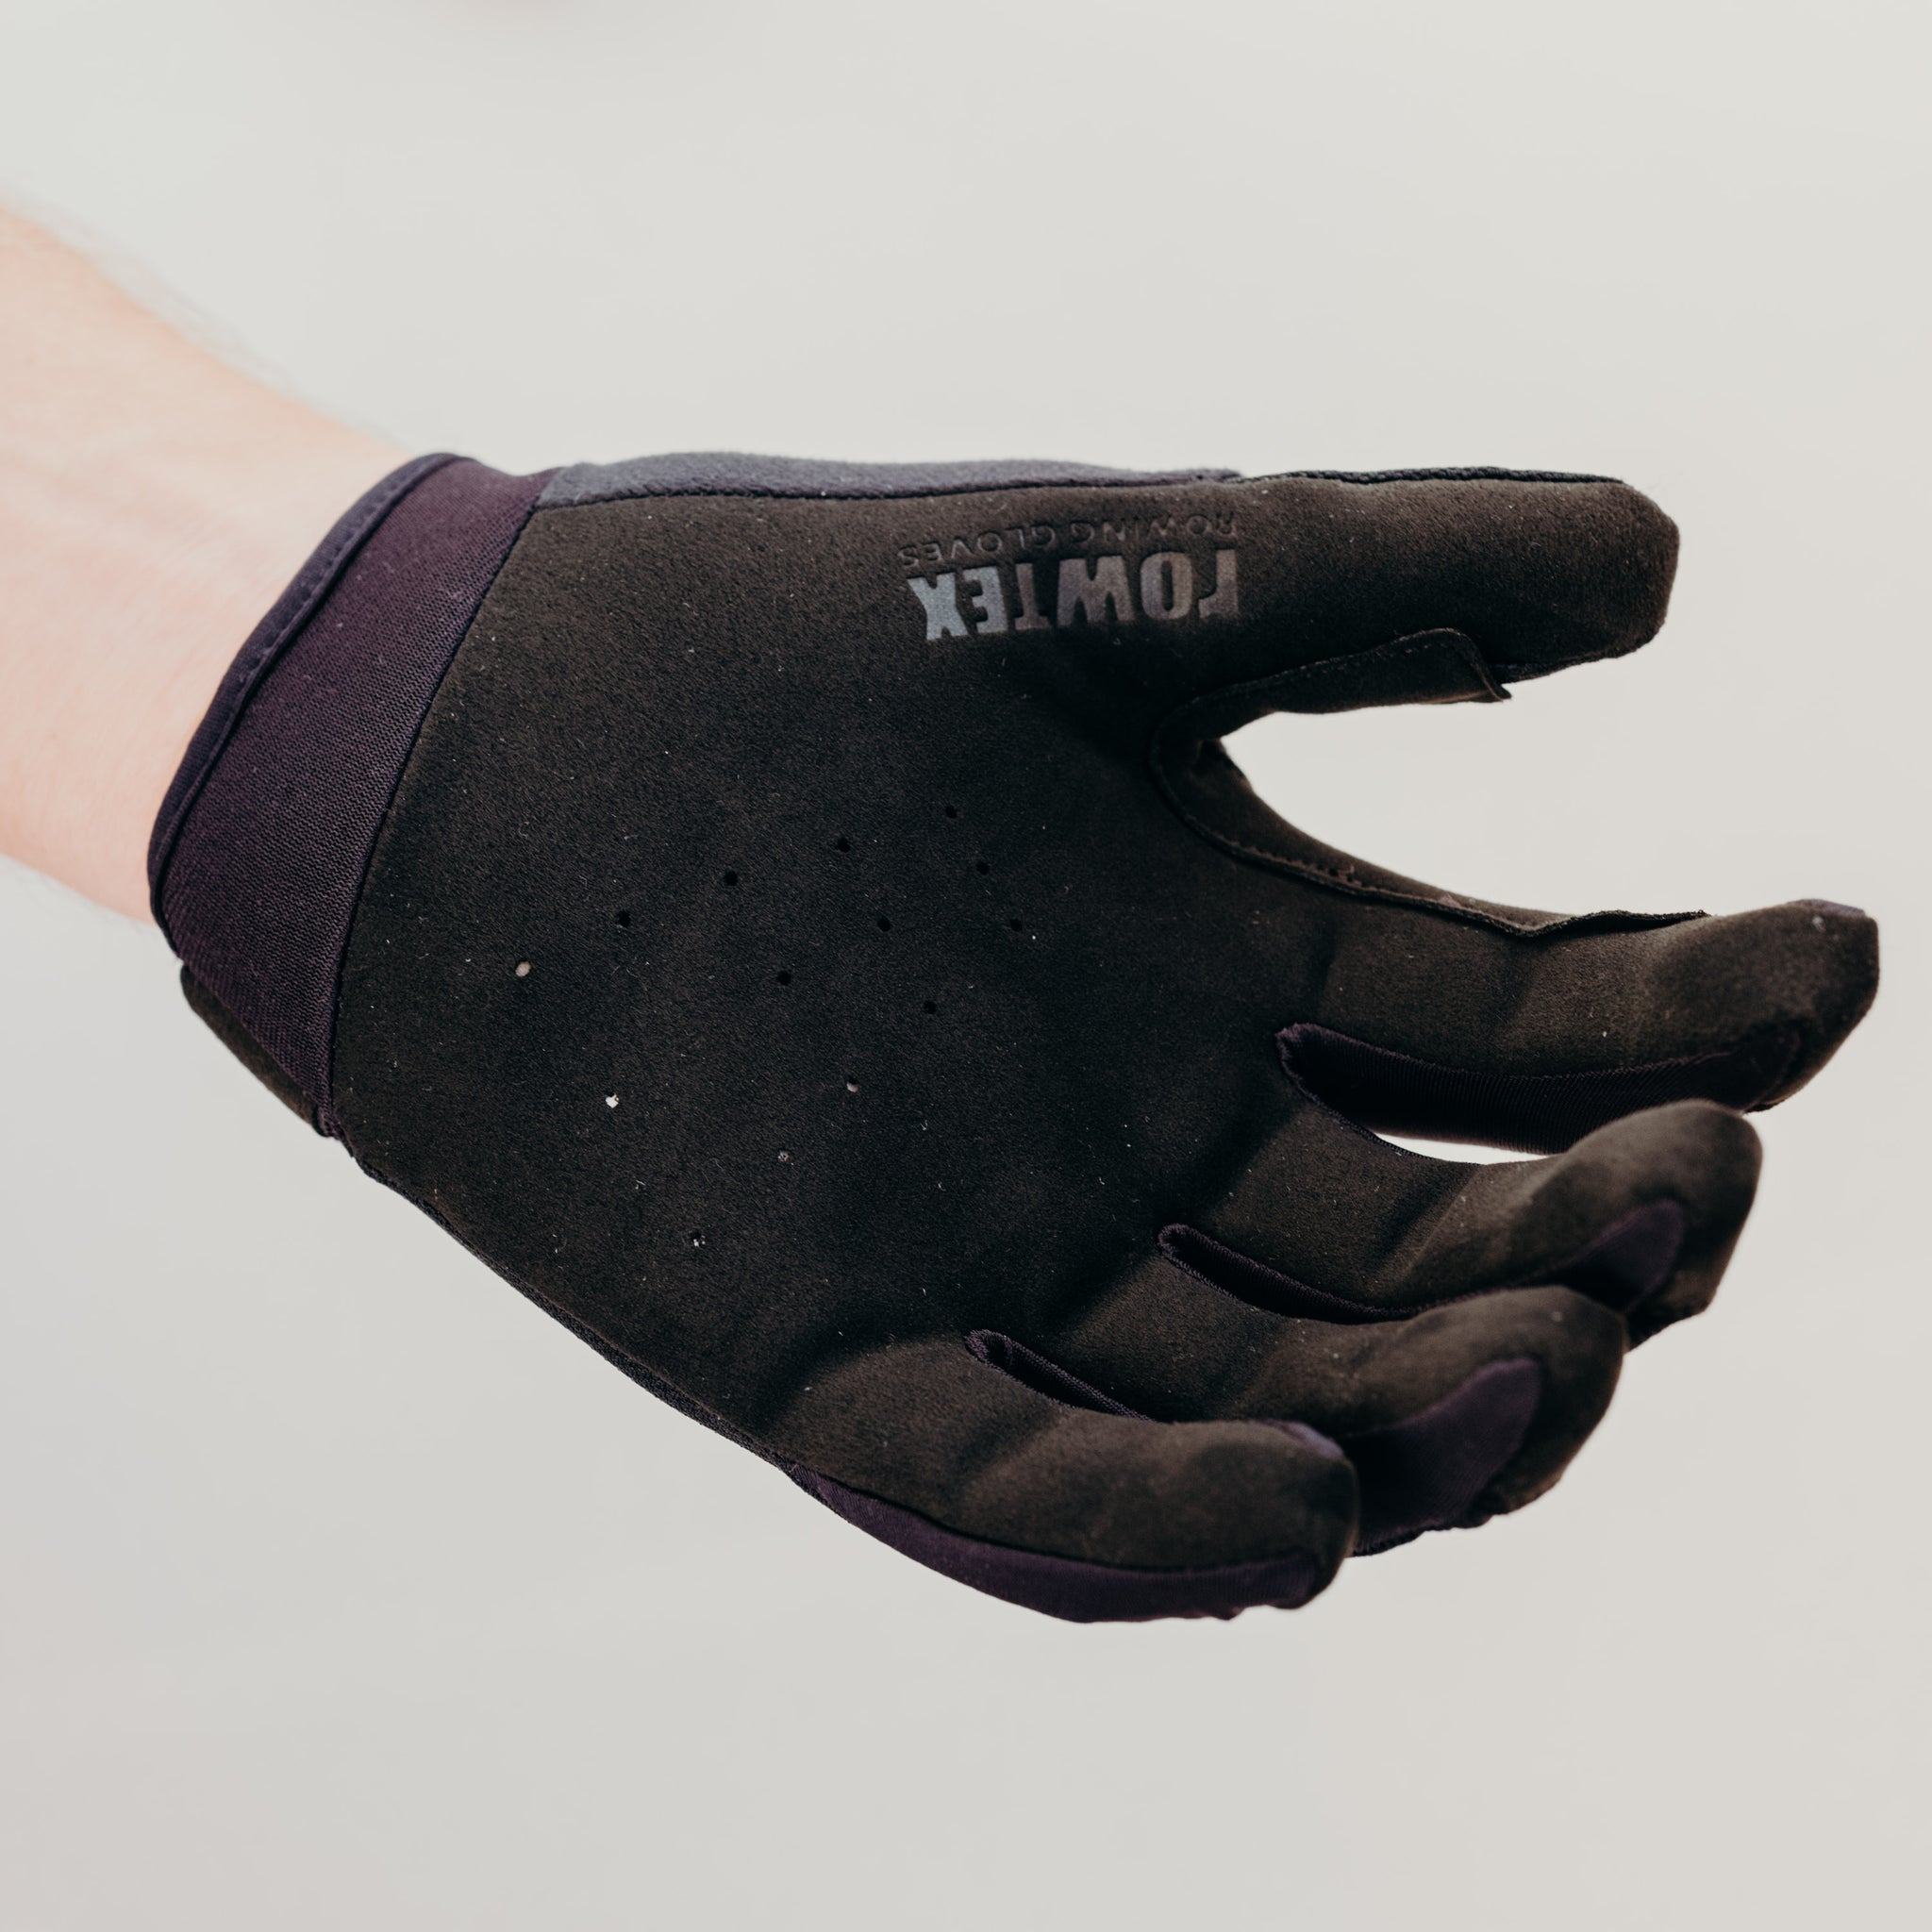 Rowing Gloves, Light Protection - LP